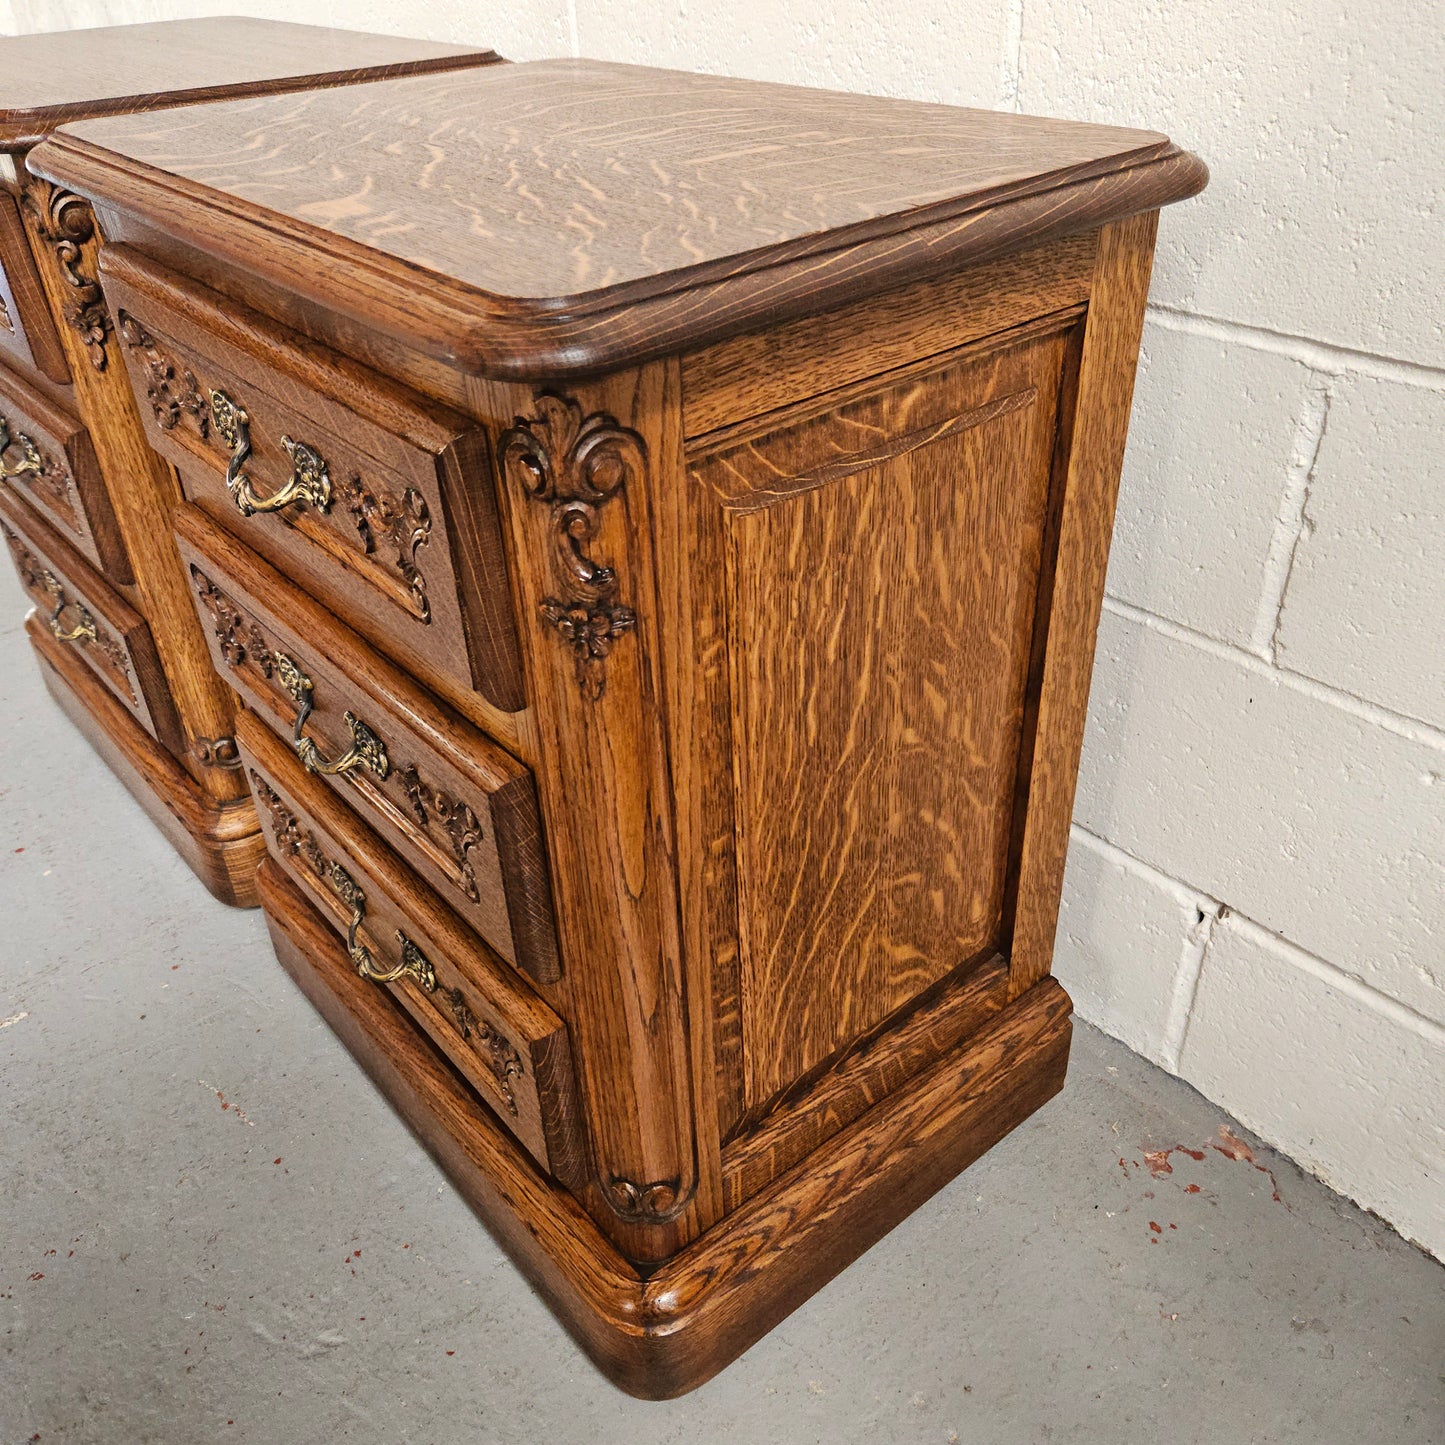 Hard to find Louis XVI style French Oak bedsides with three drawers and lovely carvings. They are in good original detailed condition. 